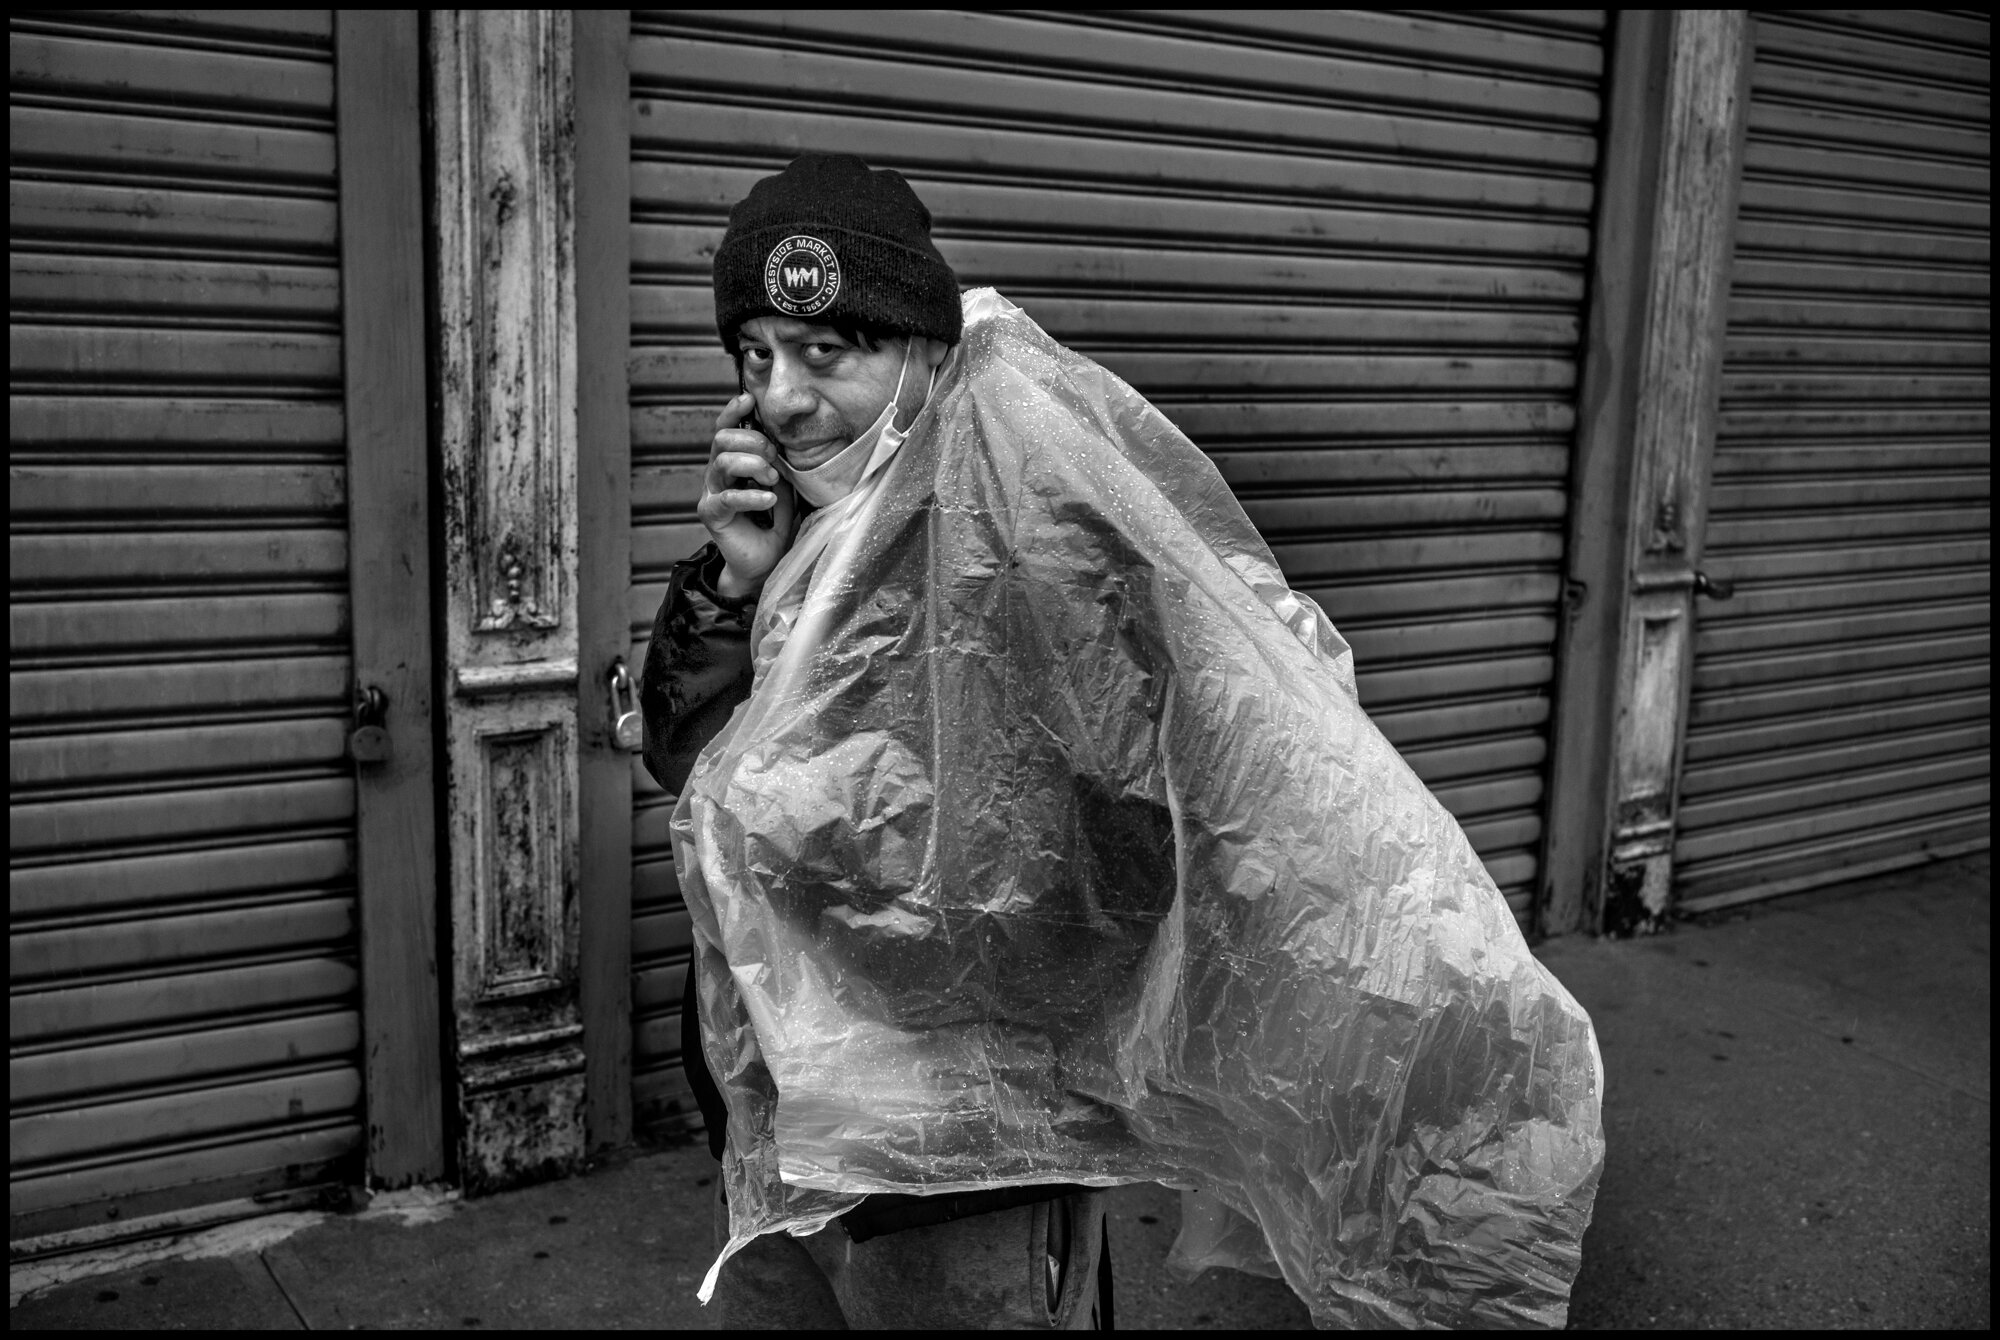  A delivery man, Jacinto, from Mexico, walks by during a rain storm on Amsterdam Ave.  March 23, 2020. © Peter Turnley.  ID# 02-003 